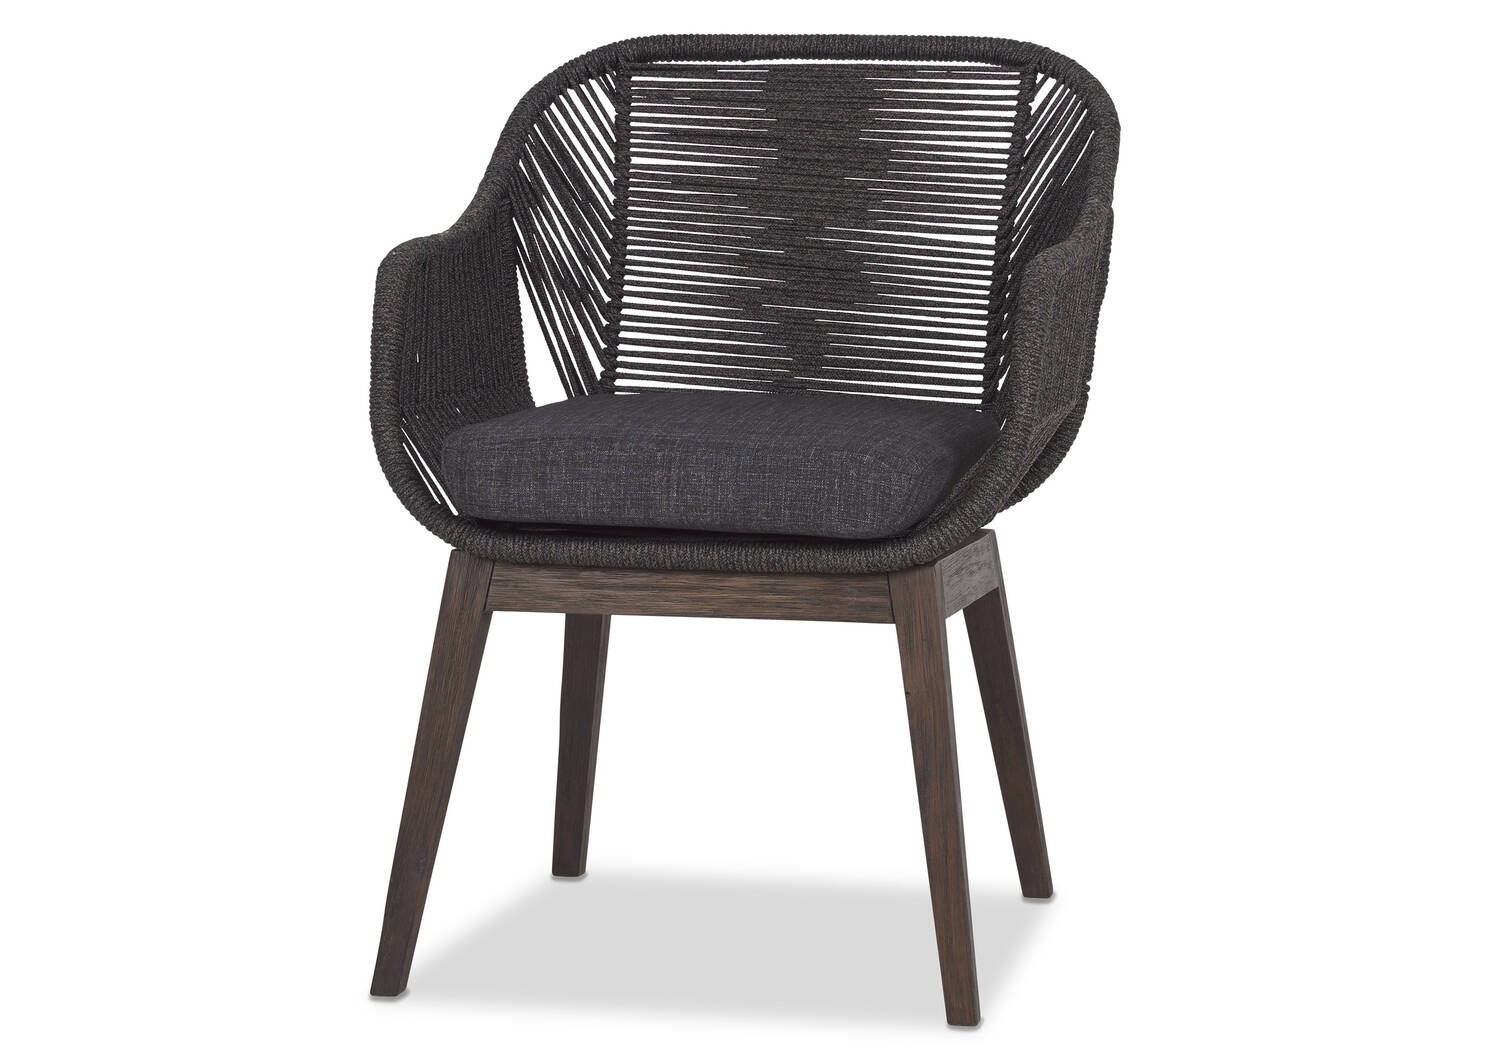 Grenada Dining Chair -Kit Charcoal